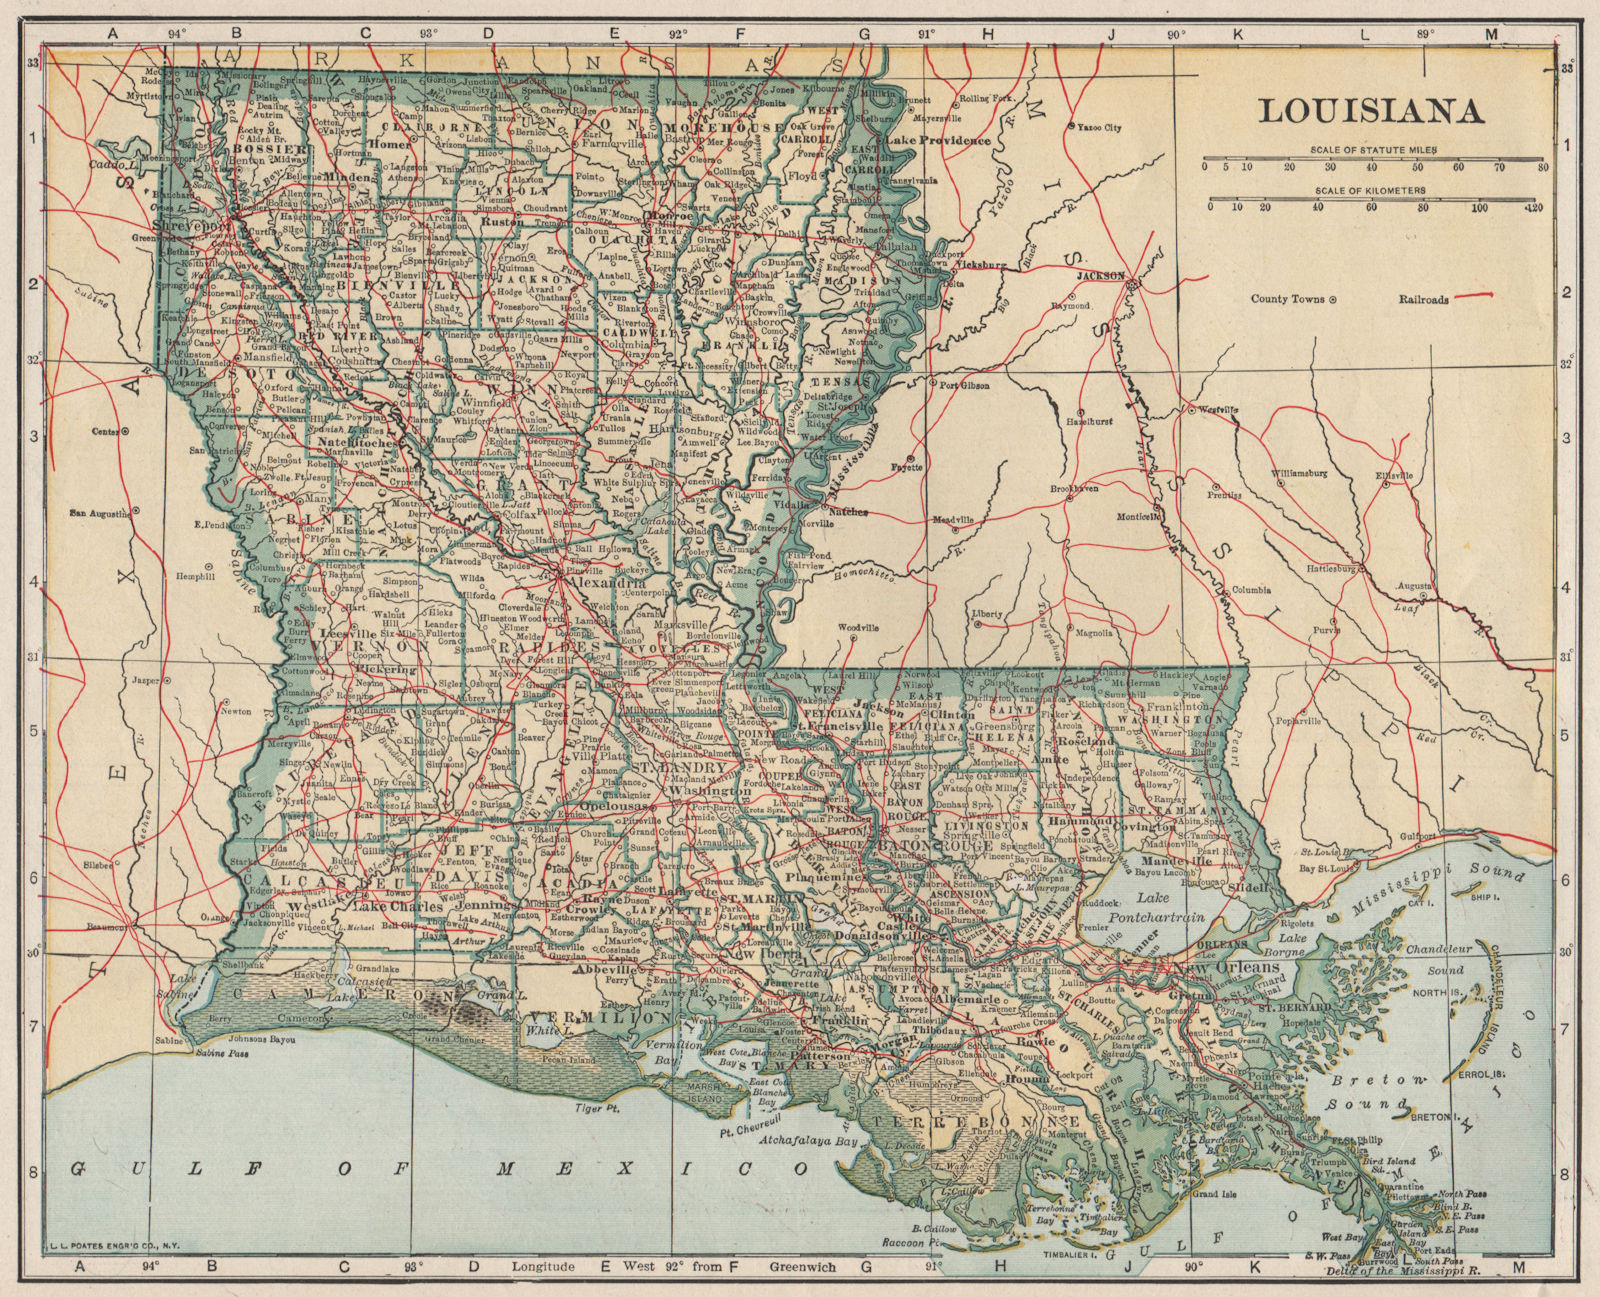 Louisiana state map showing railroads. POATES 1925 old vintage plan chart